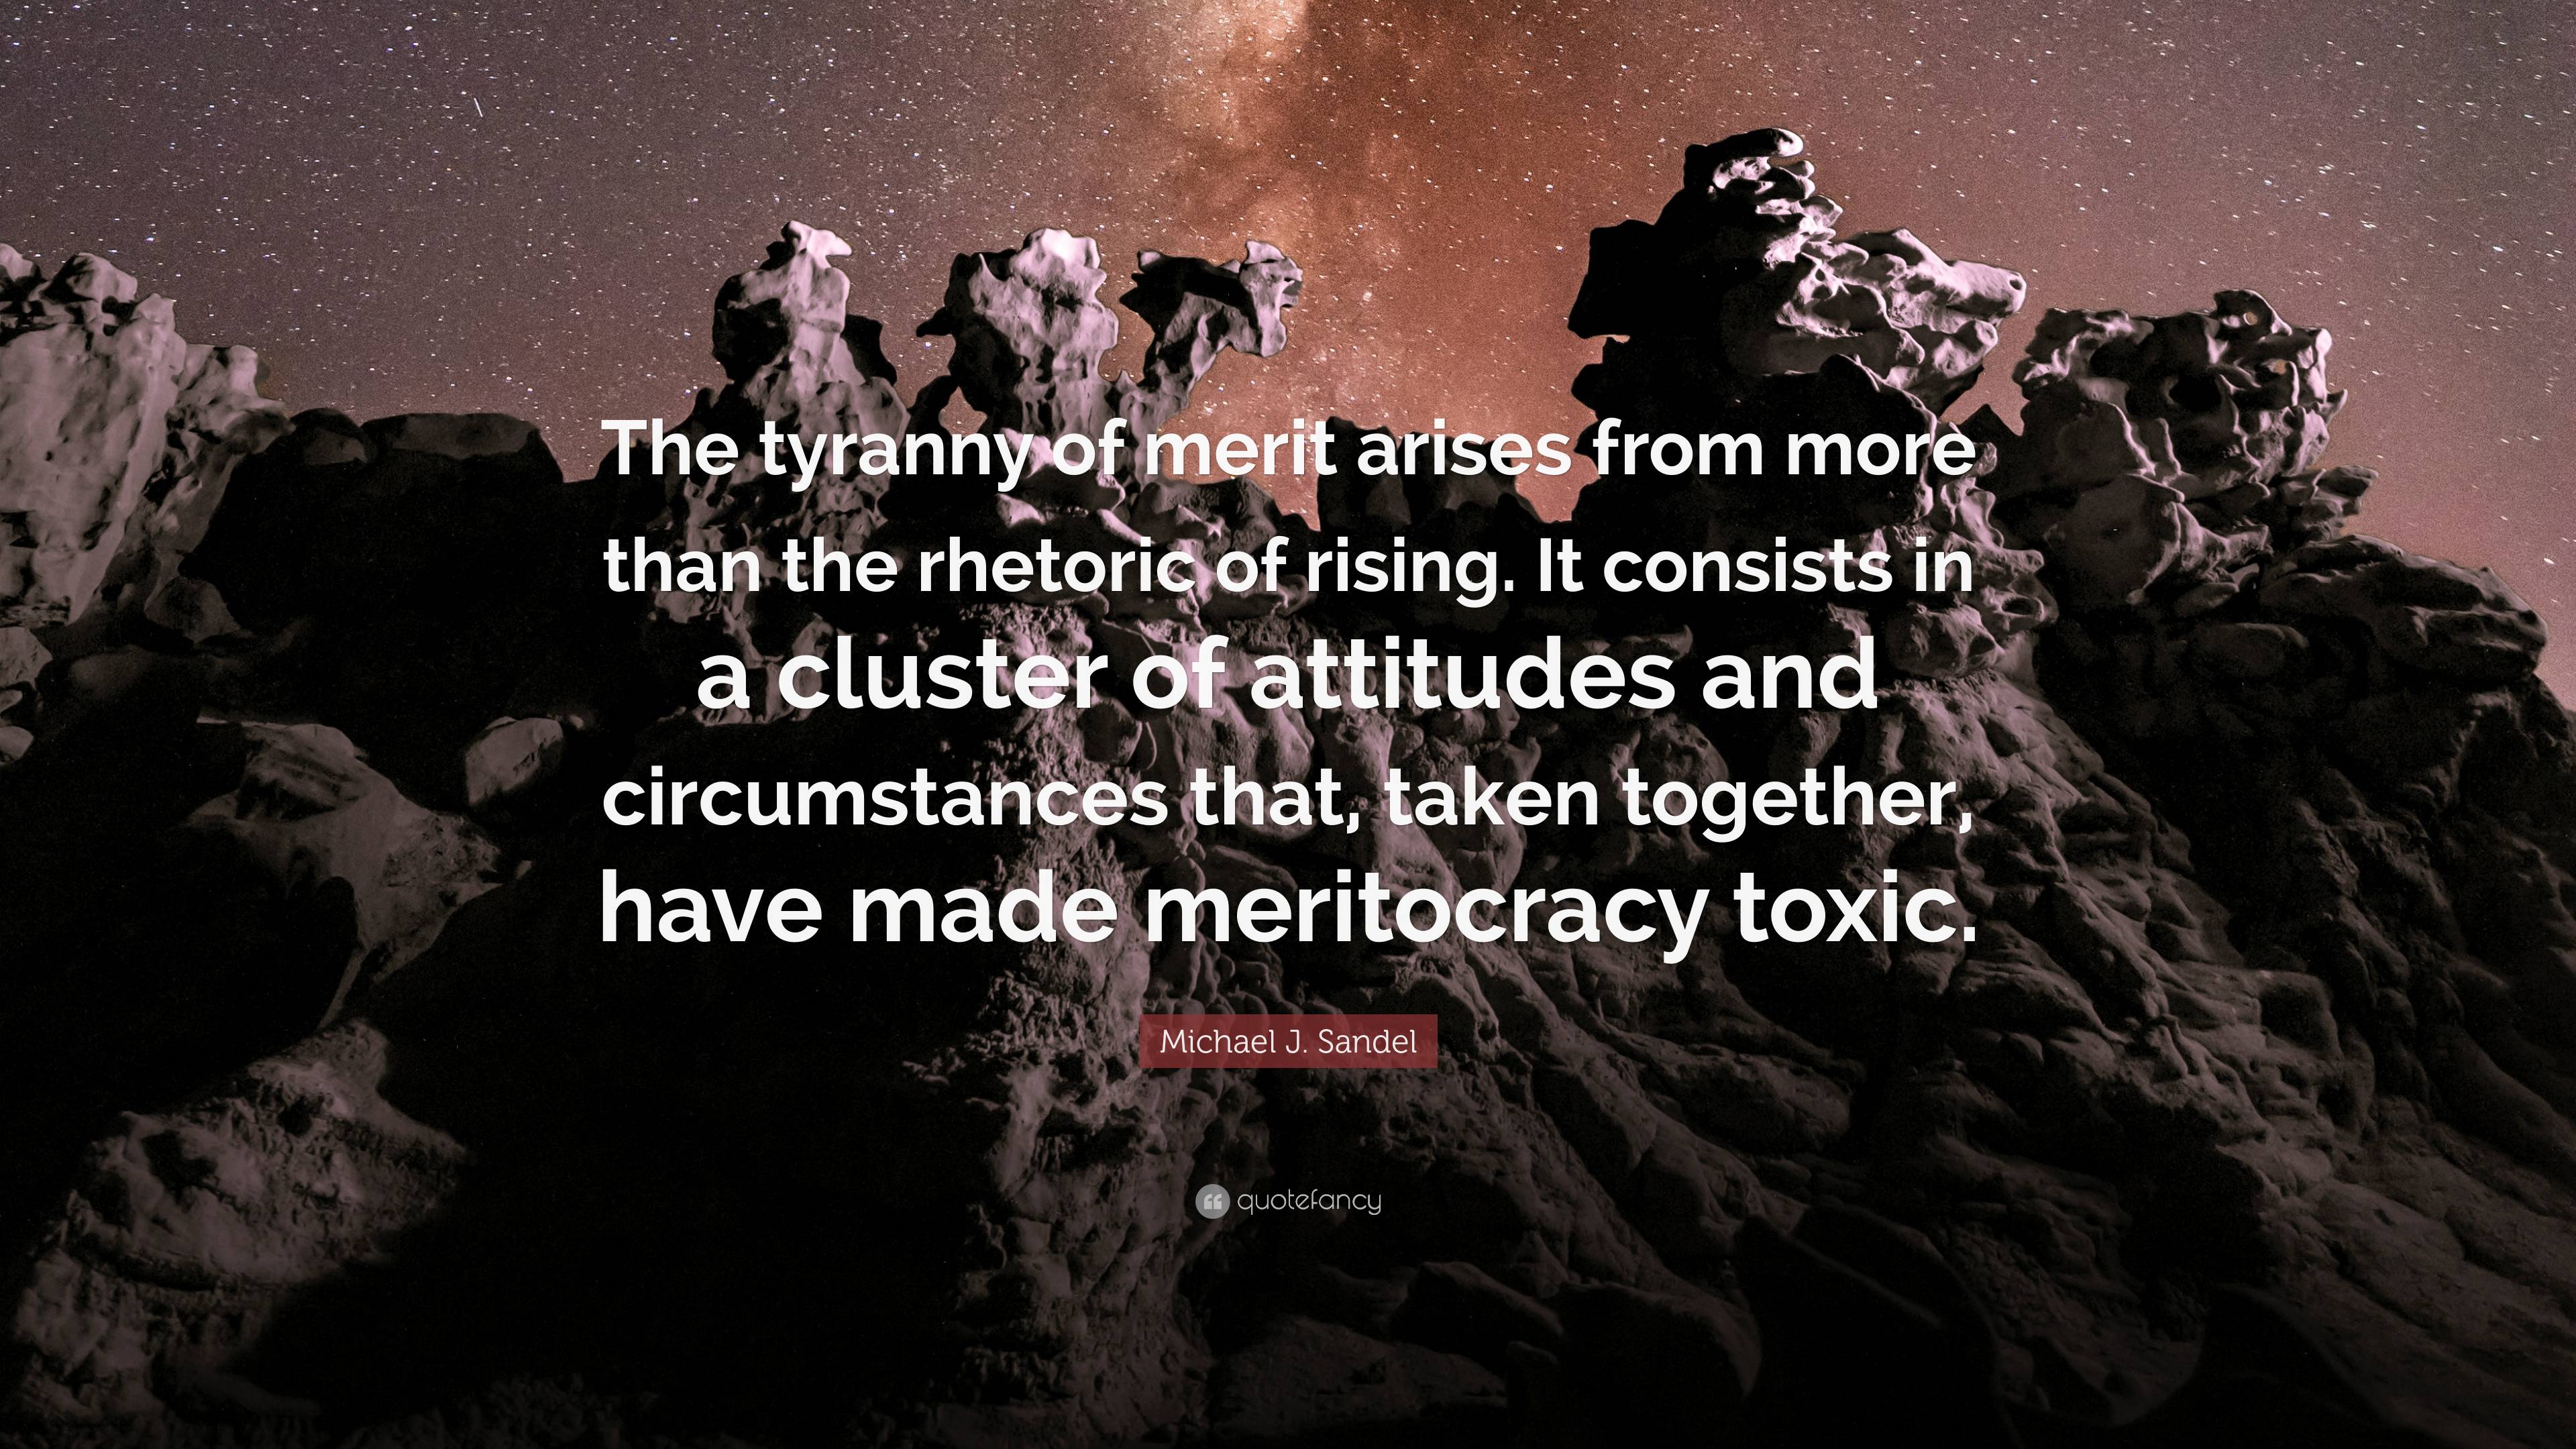 Michael J. Sandel Quote: “The tyranny of merit arises from more than ...